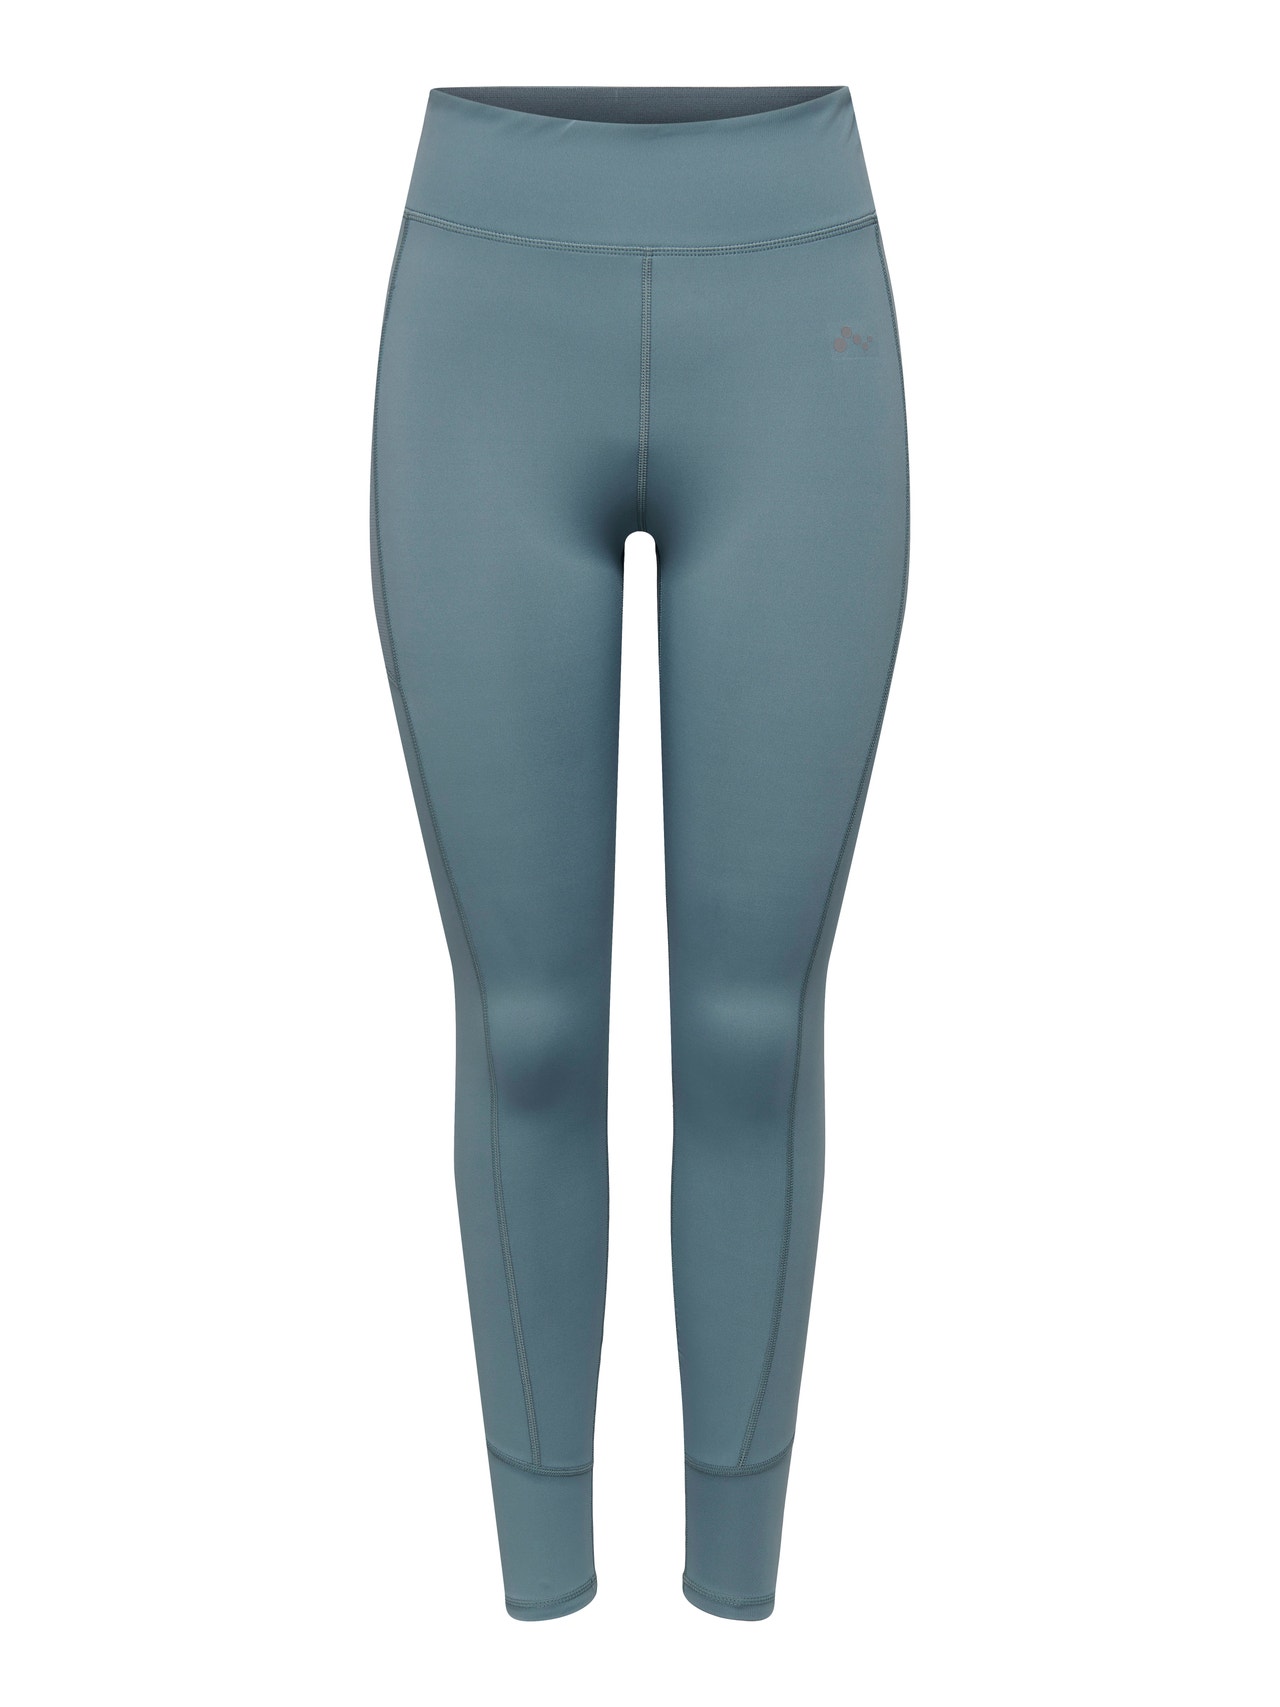 ONLY Tight Fit High waist Leggings -Blue Mirage - 15274629